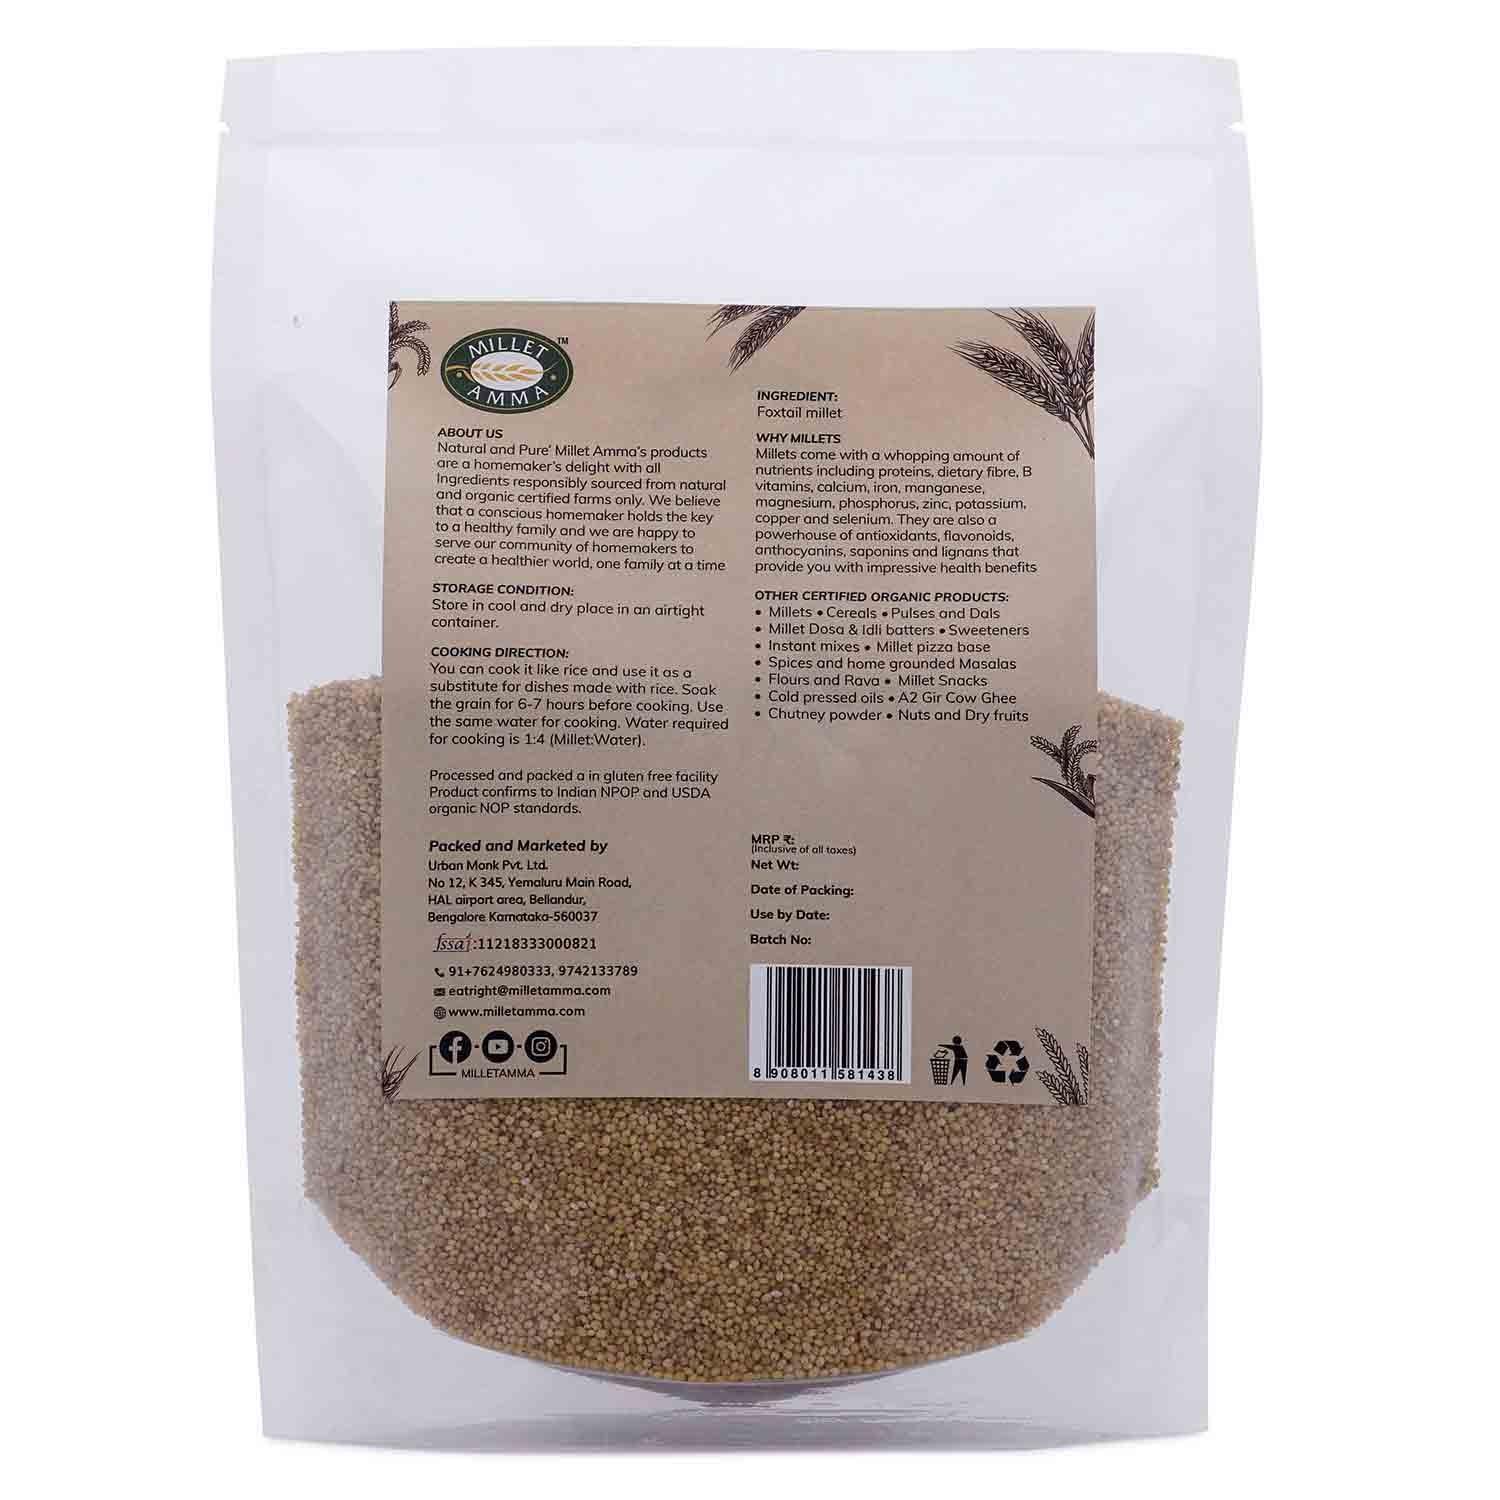 Millet Amma’s Organic Foxtail Millet Grains- Millet Amma’s nutritious Organic Foxtail Millet Grains are rich in fiber, iron and Vitamin B12. Our premium unpolished Foxtail Millets, offer you a daily dose of essential proteins and good fats.  You can use it as a replacement for rice, you can use it to make all the dishes you normally use rice for. It is an ideal option for people following a millet diet; it also aids in weight management.